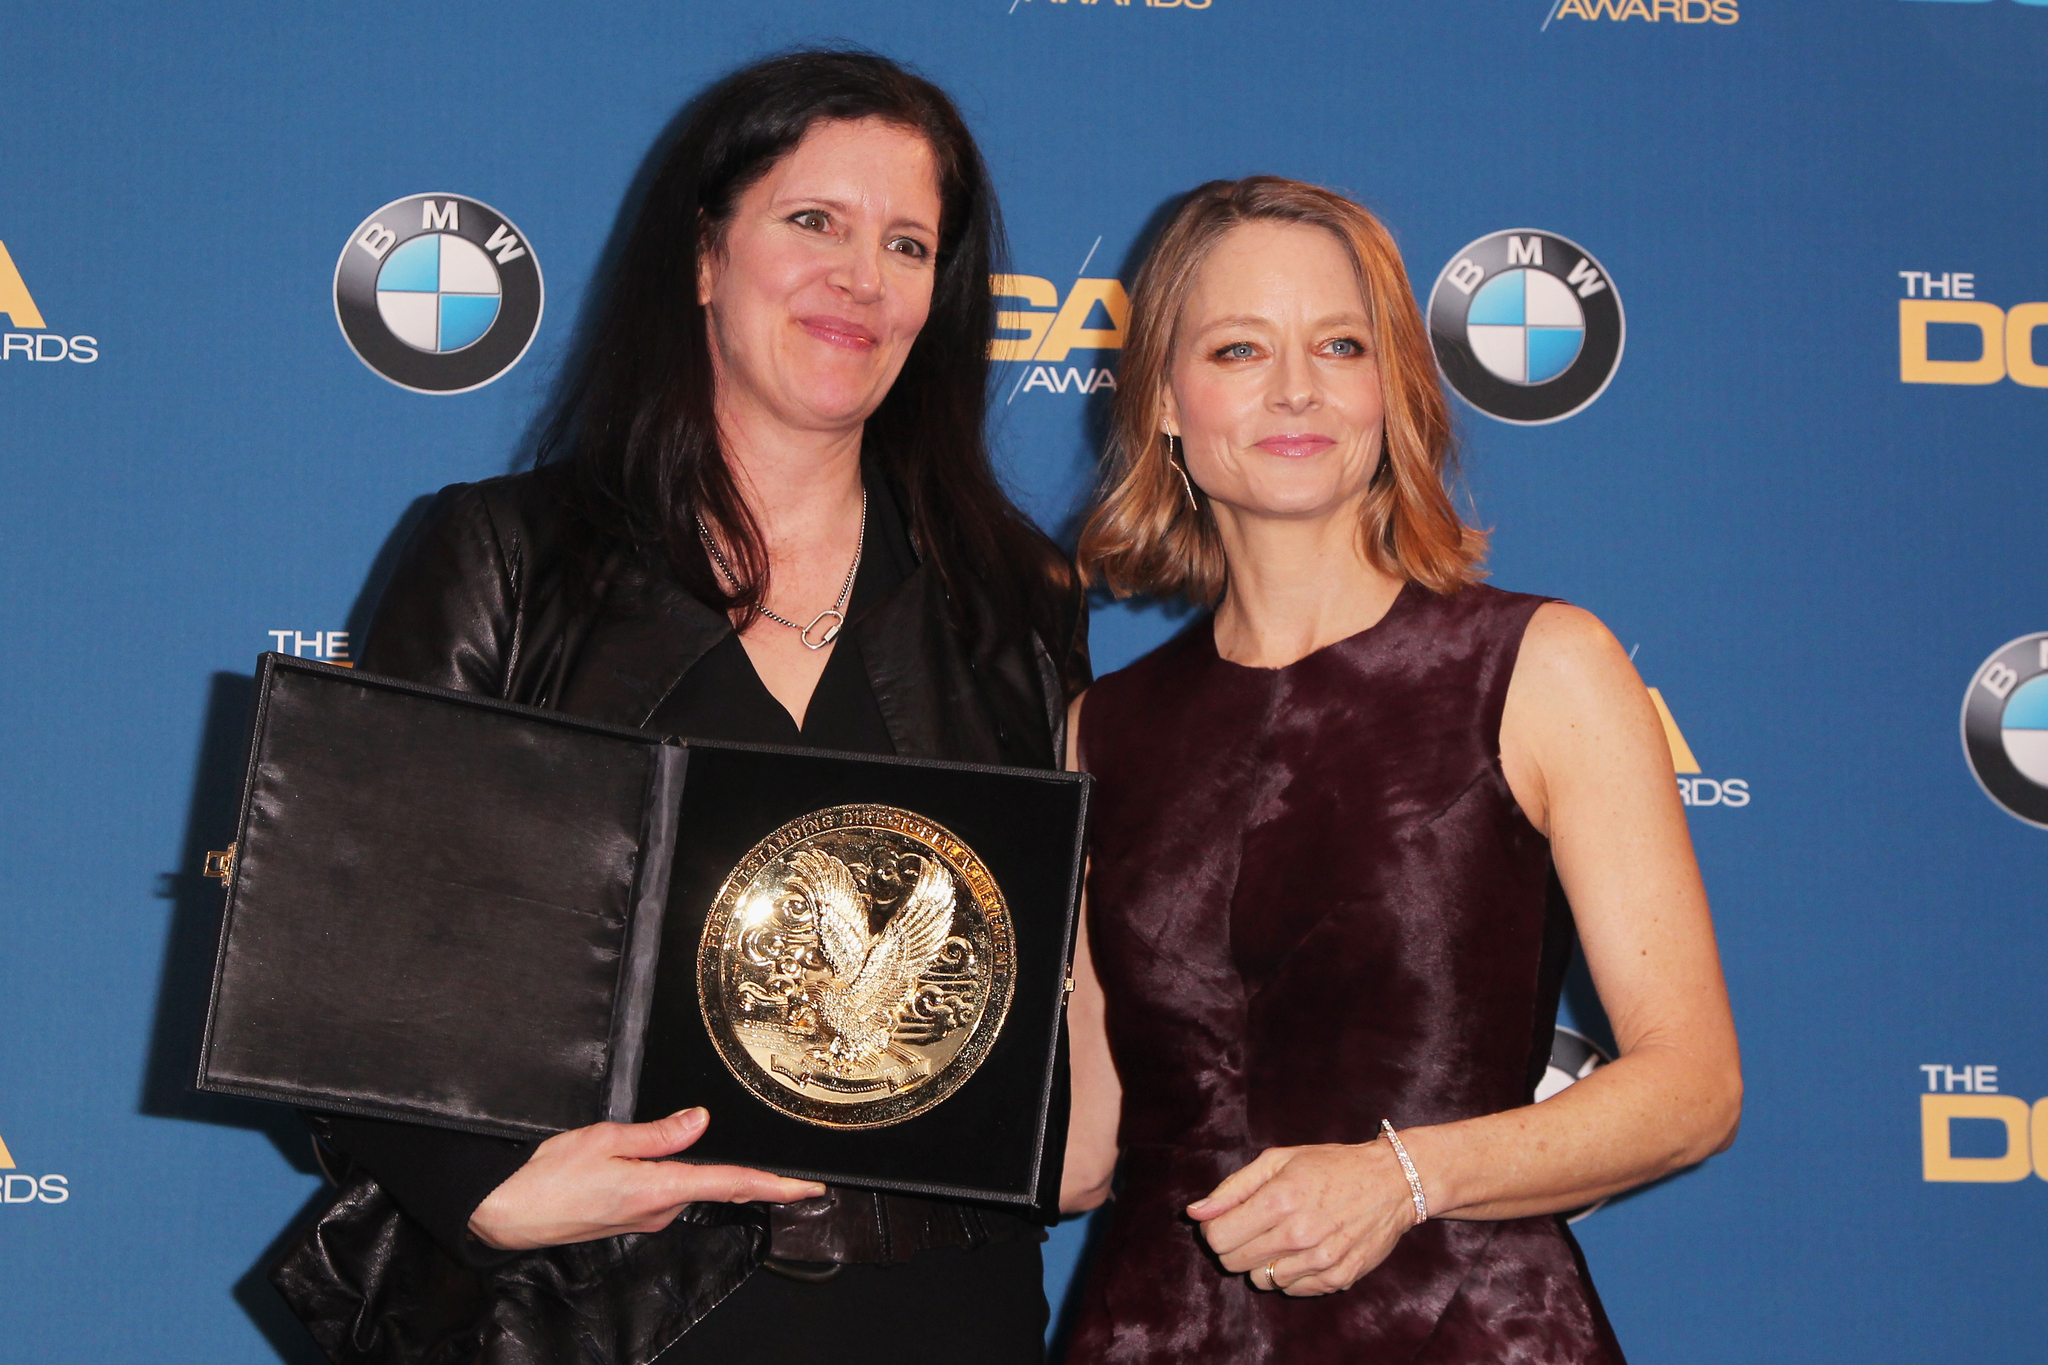 Jodie Foster and Laura Poitras